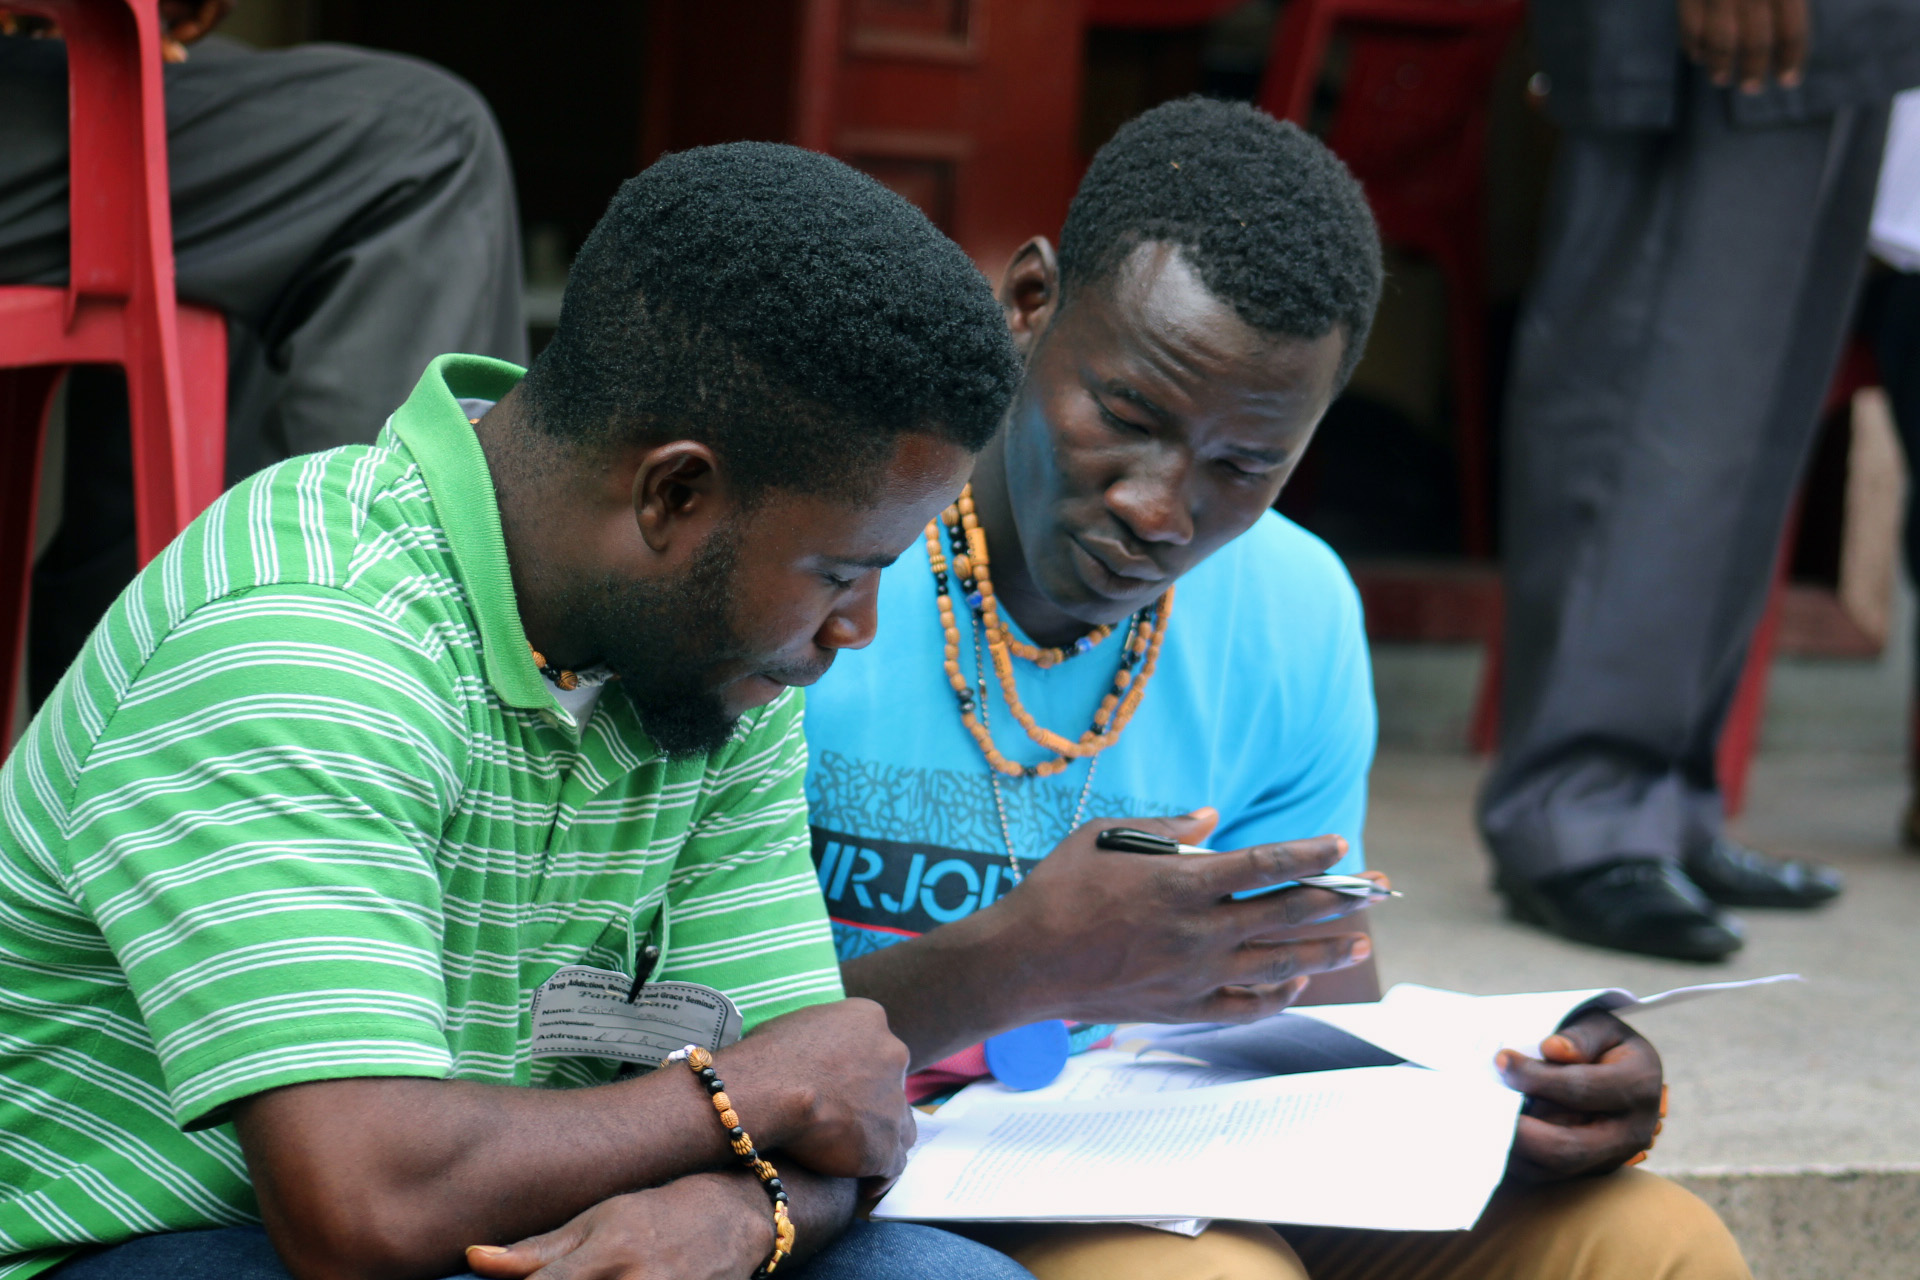 Eric Nyenow (left) and Emmanuel Gbuie, residents of the United Methodist New Life Recovery Center, review their notes during an addiction and substance abuse seminar in Monrovia, Liberia. The United Methodist Church in Liberia hosted the seminar to help local churches expand and strengthen their recovery ministries. Photo by E Julu Swen, UM News.